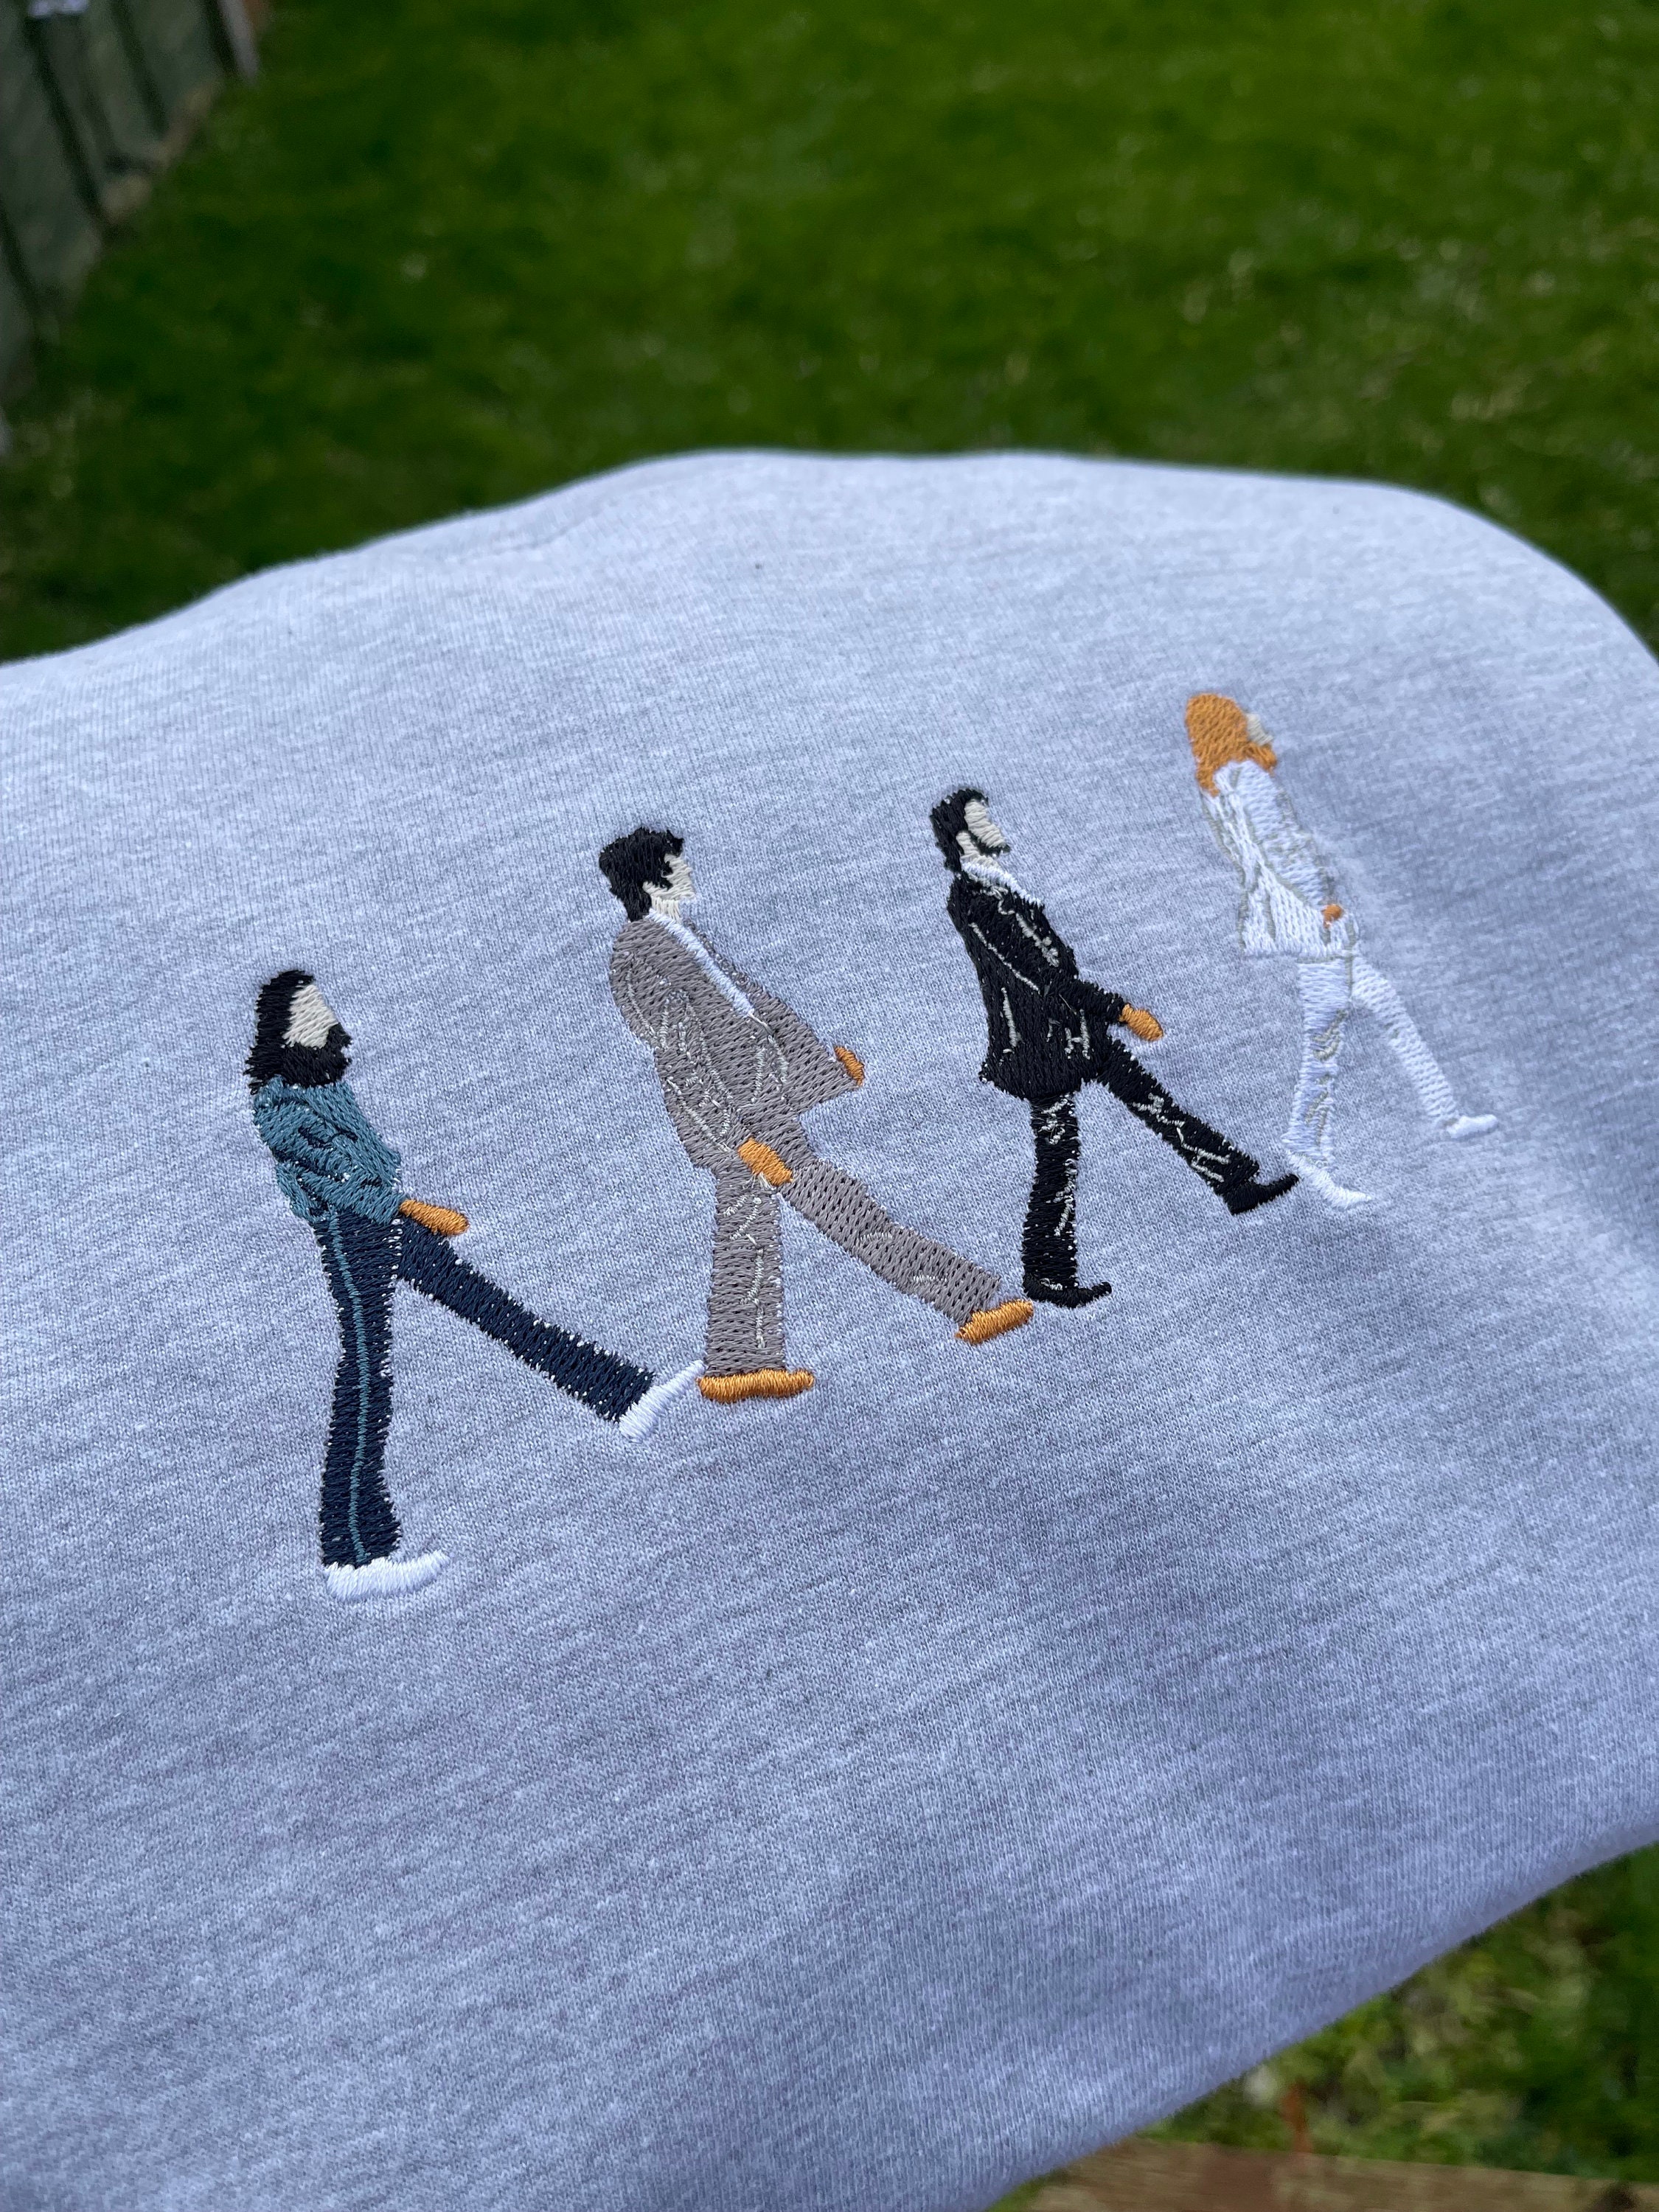 The Beatles Abbey Road Embroidery Unisex Sweatshirt Abbey Road Sweatshirt,  Crewneck Sweatshirt, Embroidered Sweatshirt. Valentines Day - Etsy